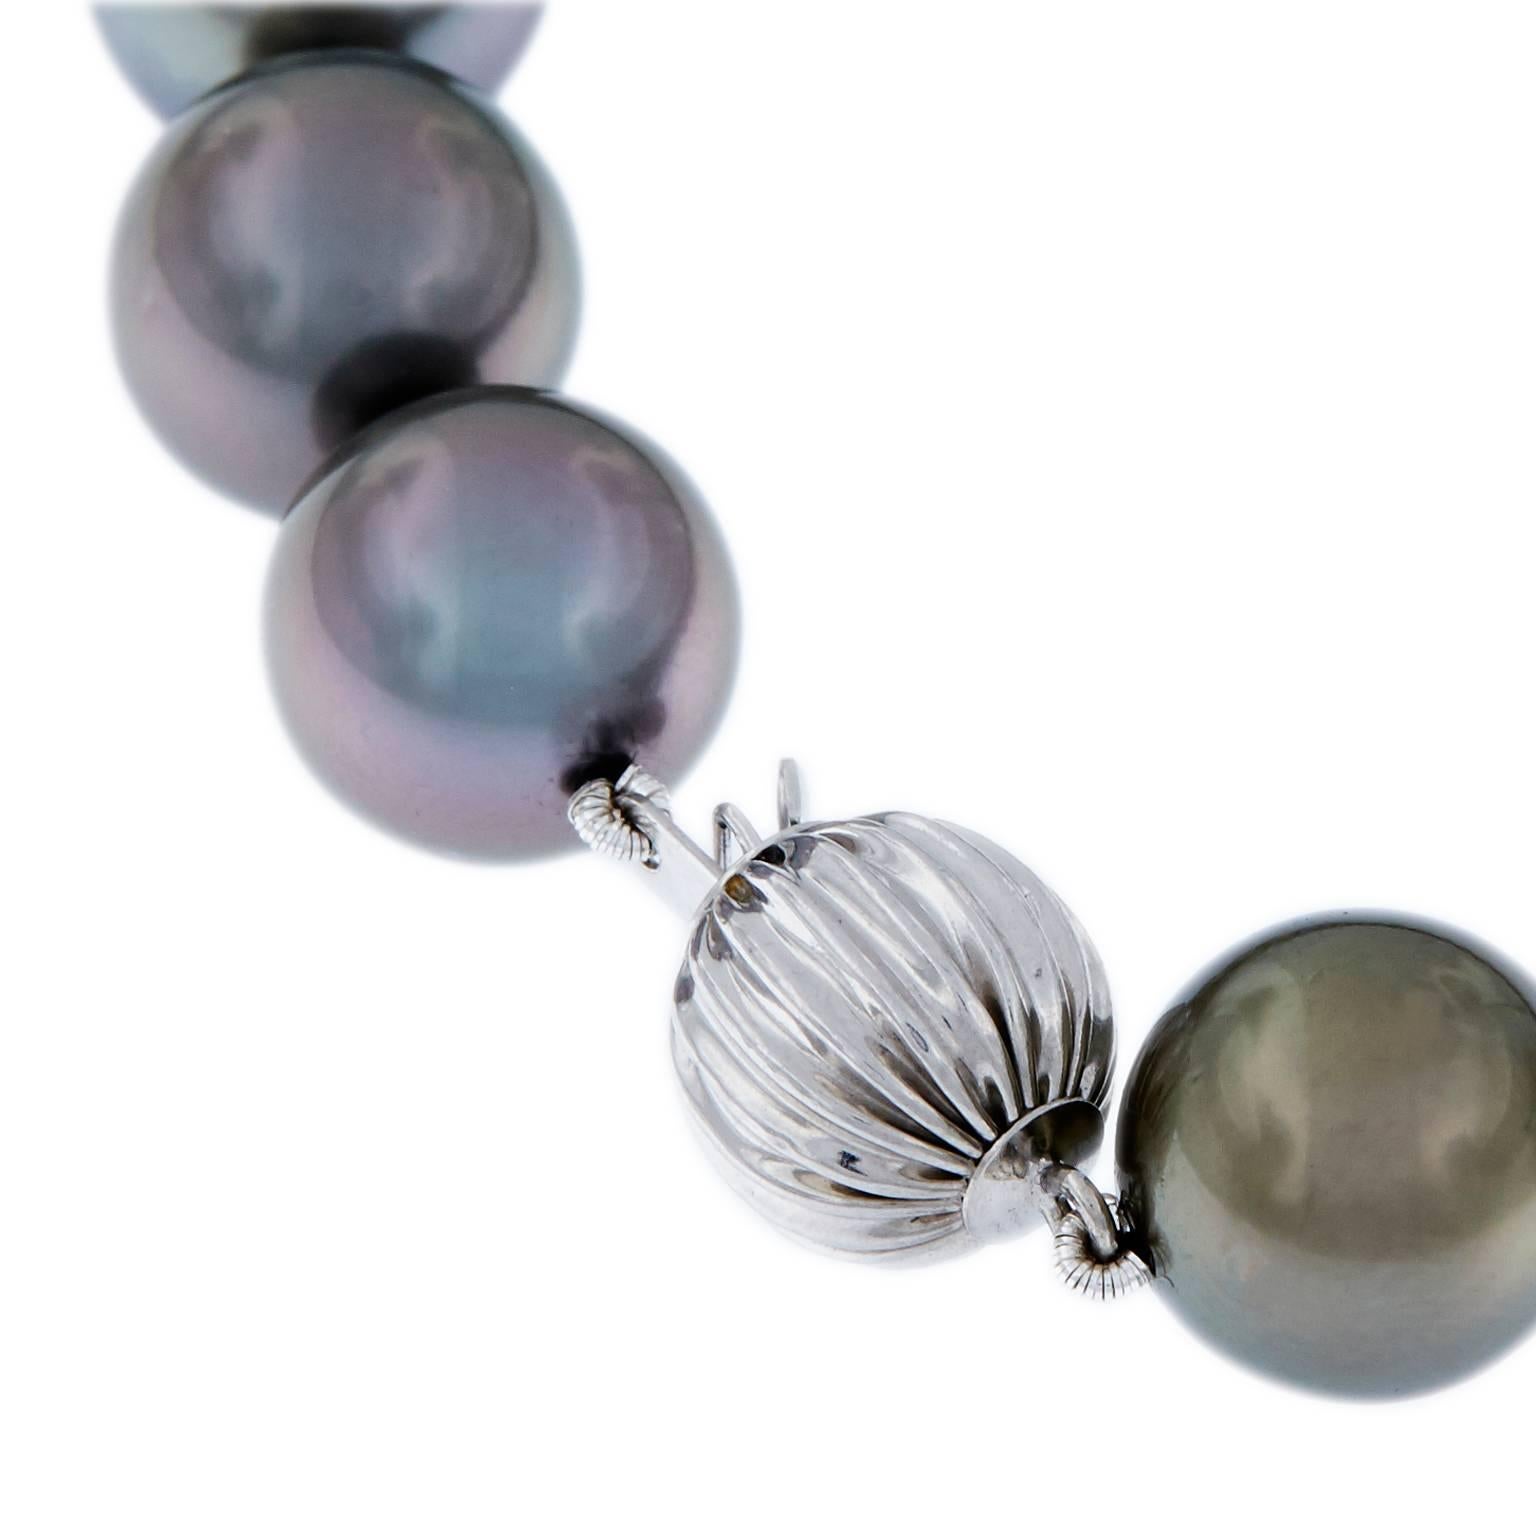 Outstanding Tahitian pearls featuring radiant luster and overtones. Necklace comprised of 35 large 11-14.8 mm pearls. Clasp is 14k white gold. Weighs 87.9 grams. 18 in Long.